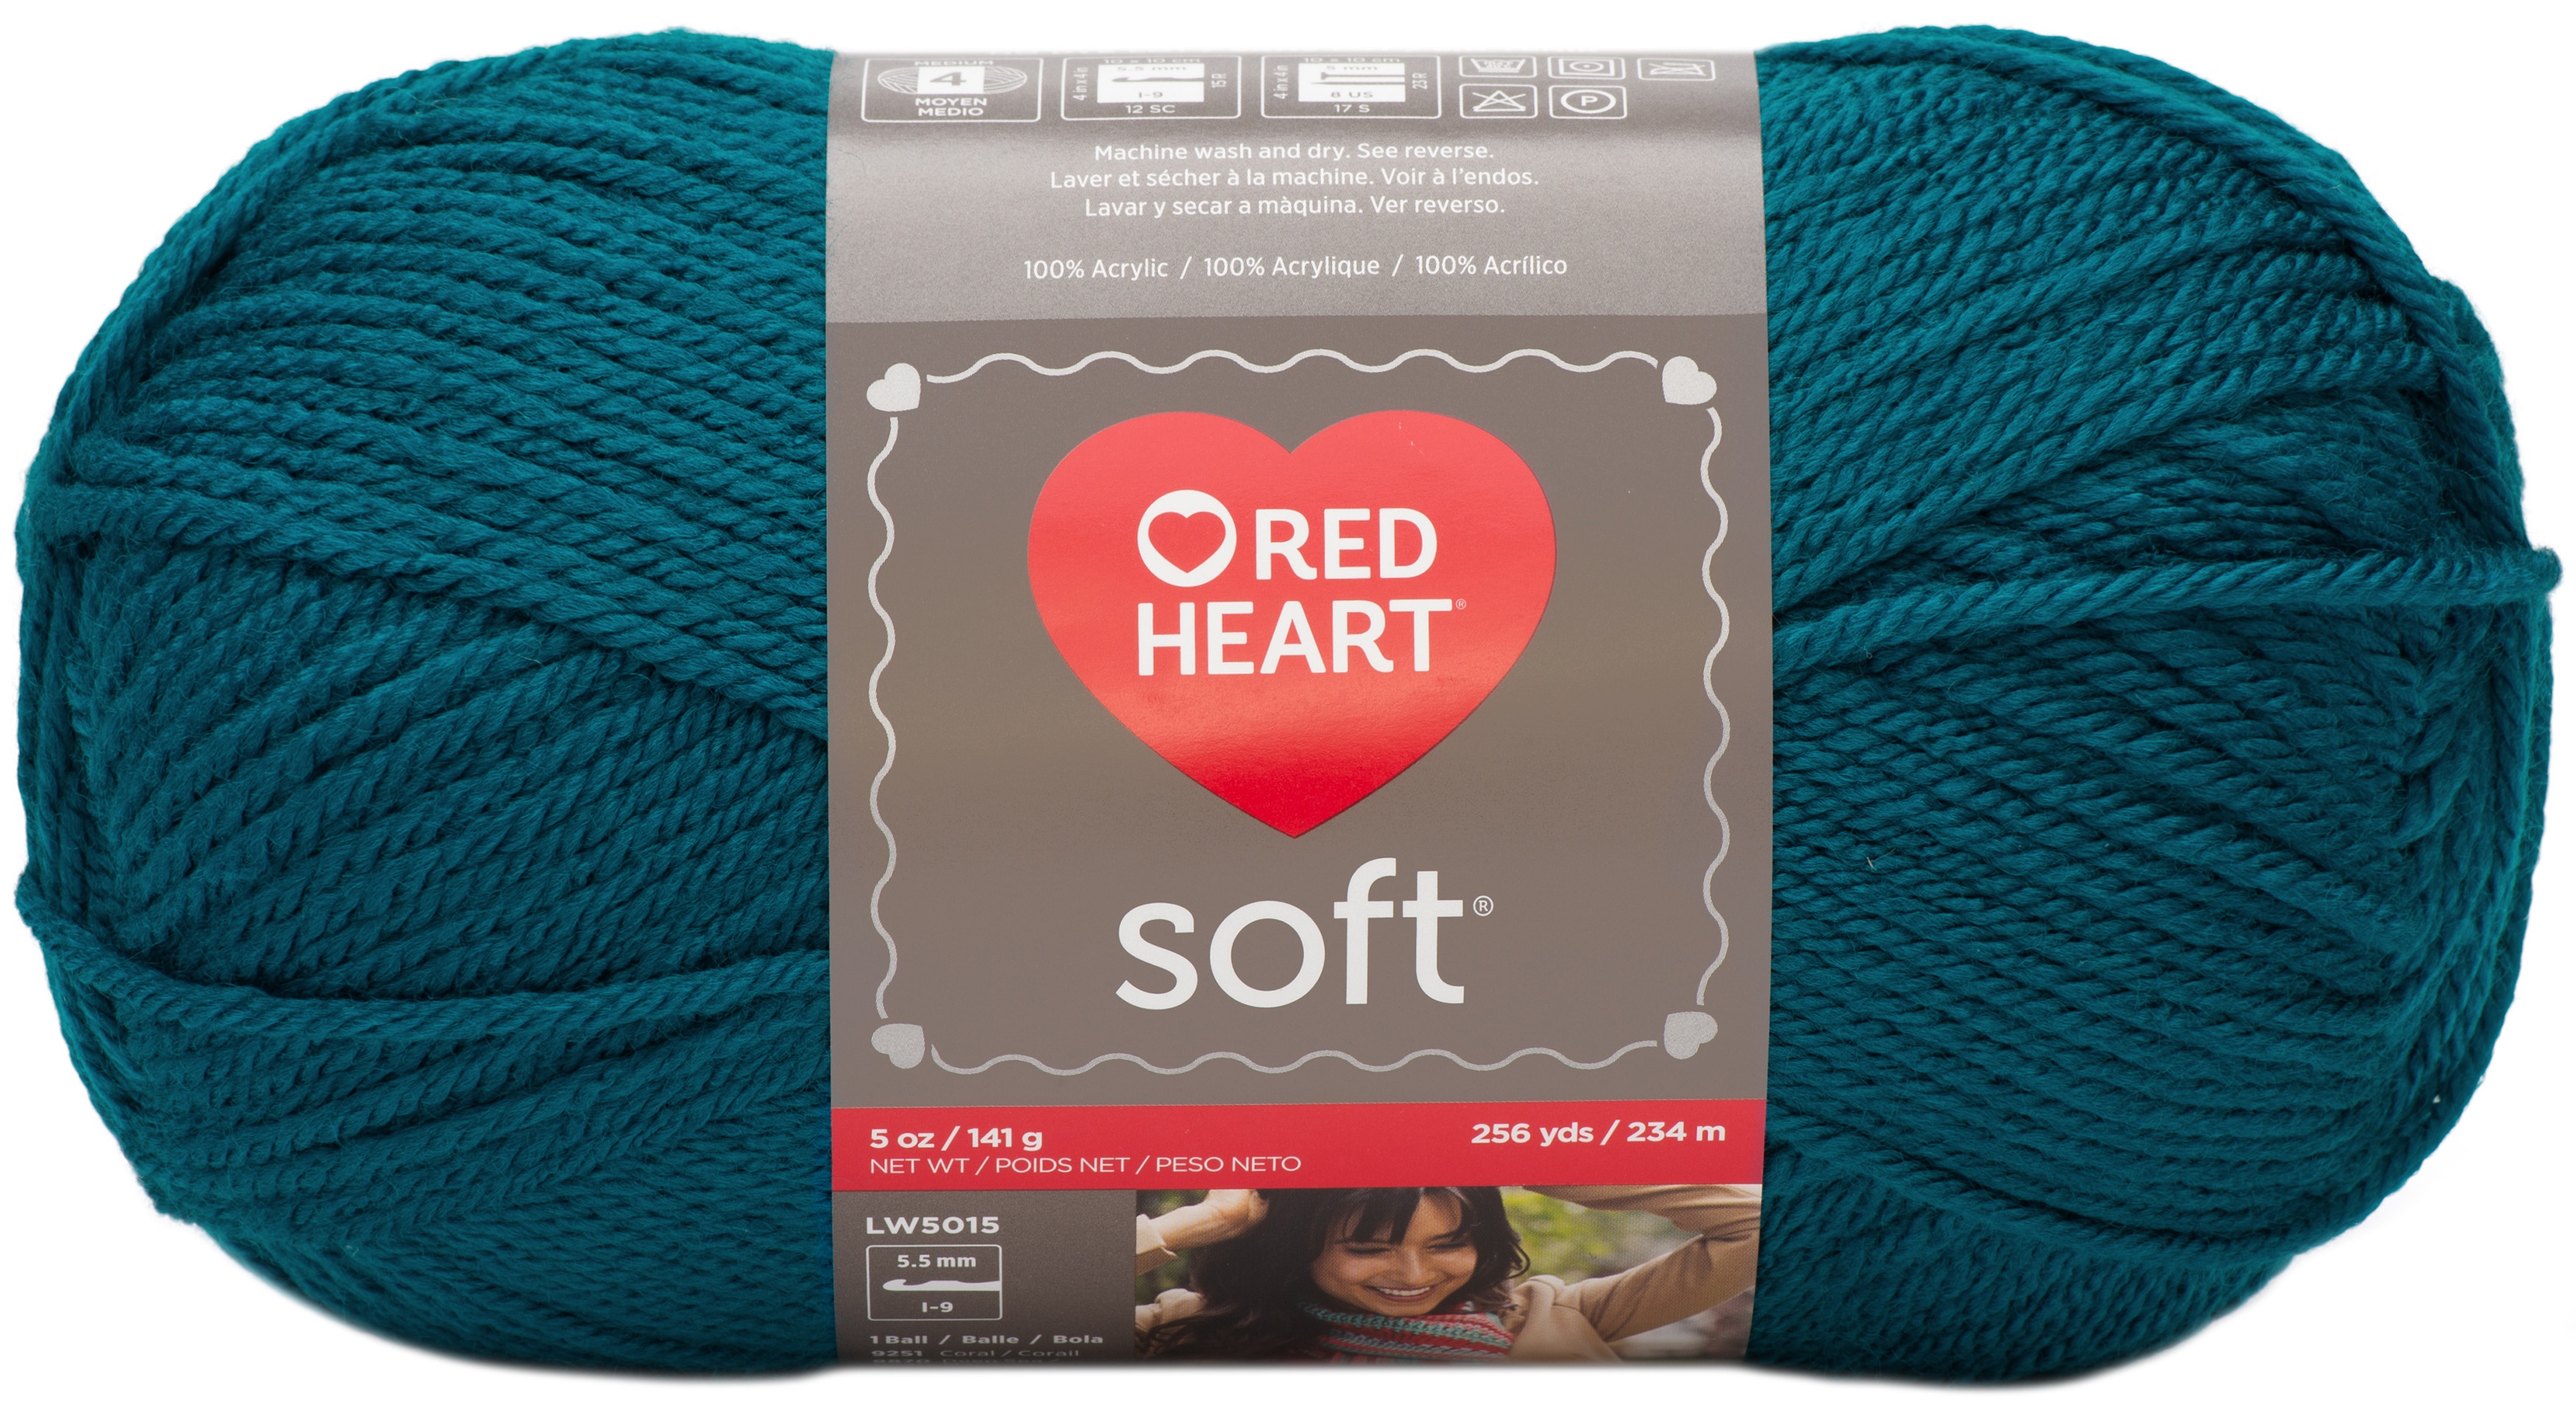 Red Heart Soft Yarn-Teal - image 1 of 2